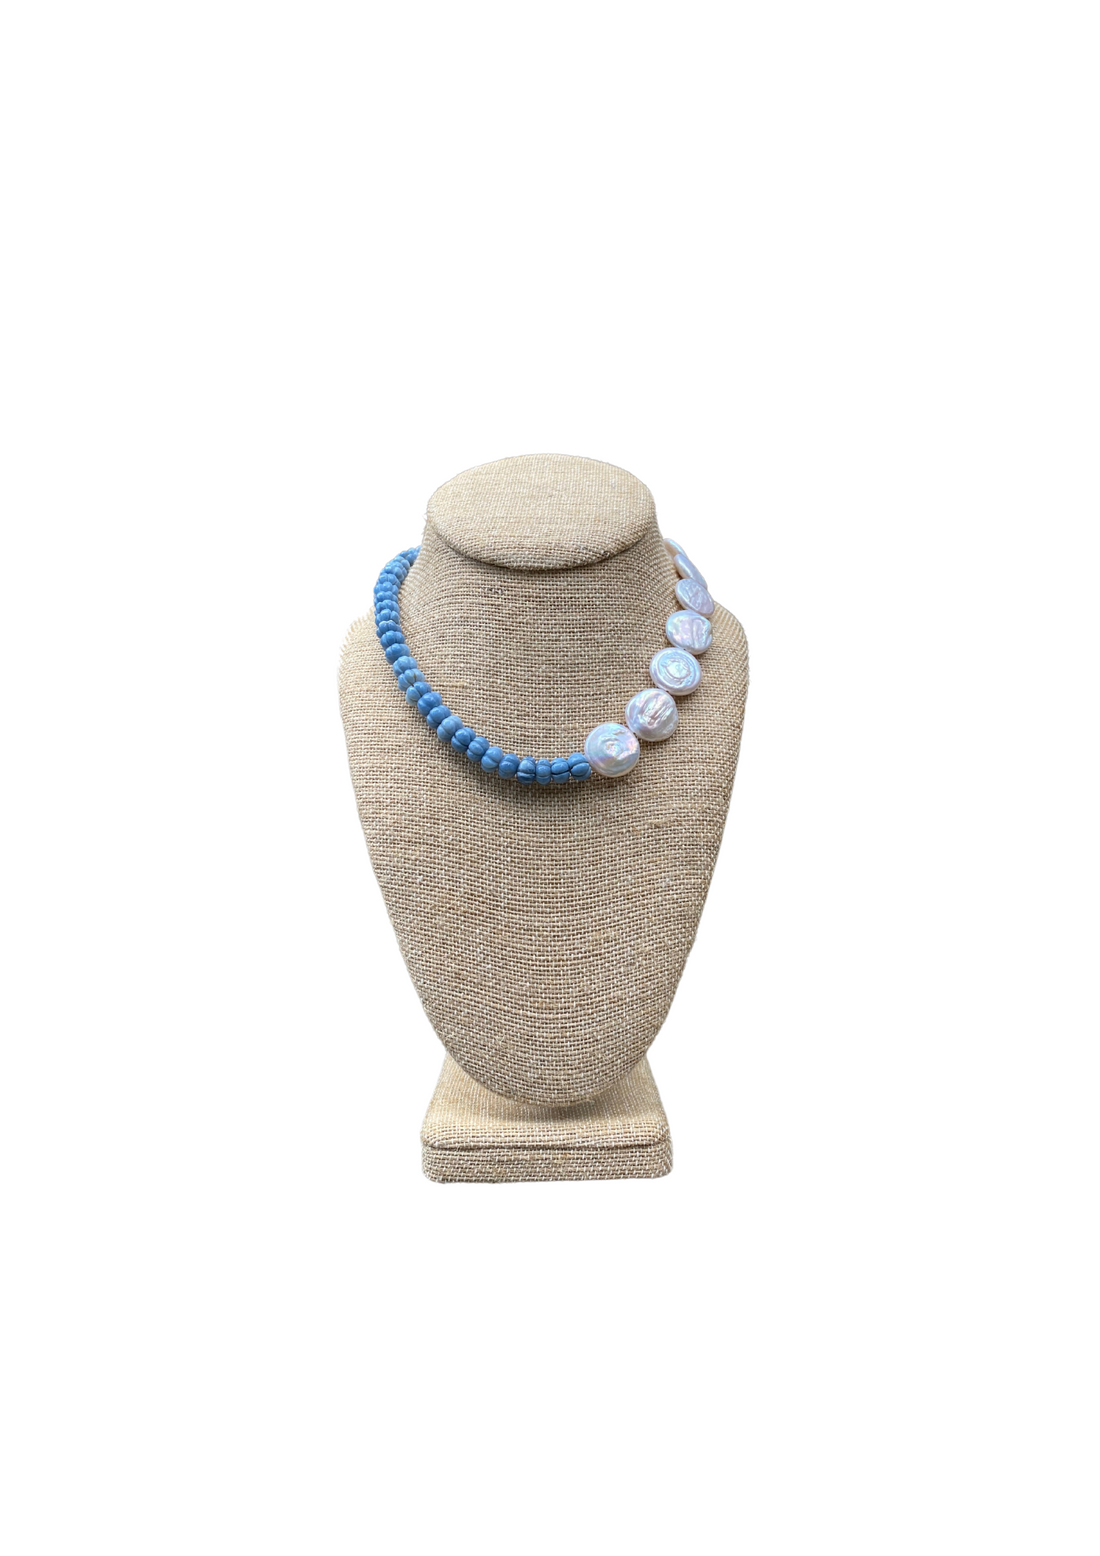 Limited Edition: Denim Opal & Freshwater Coin Pearl Necklace